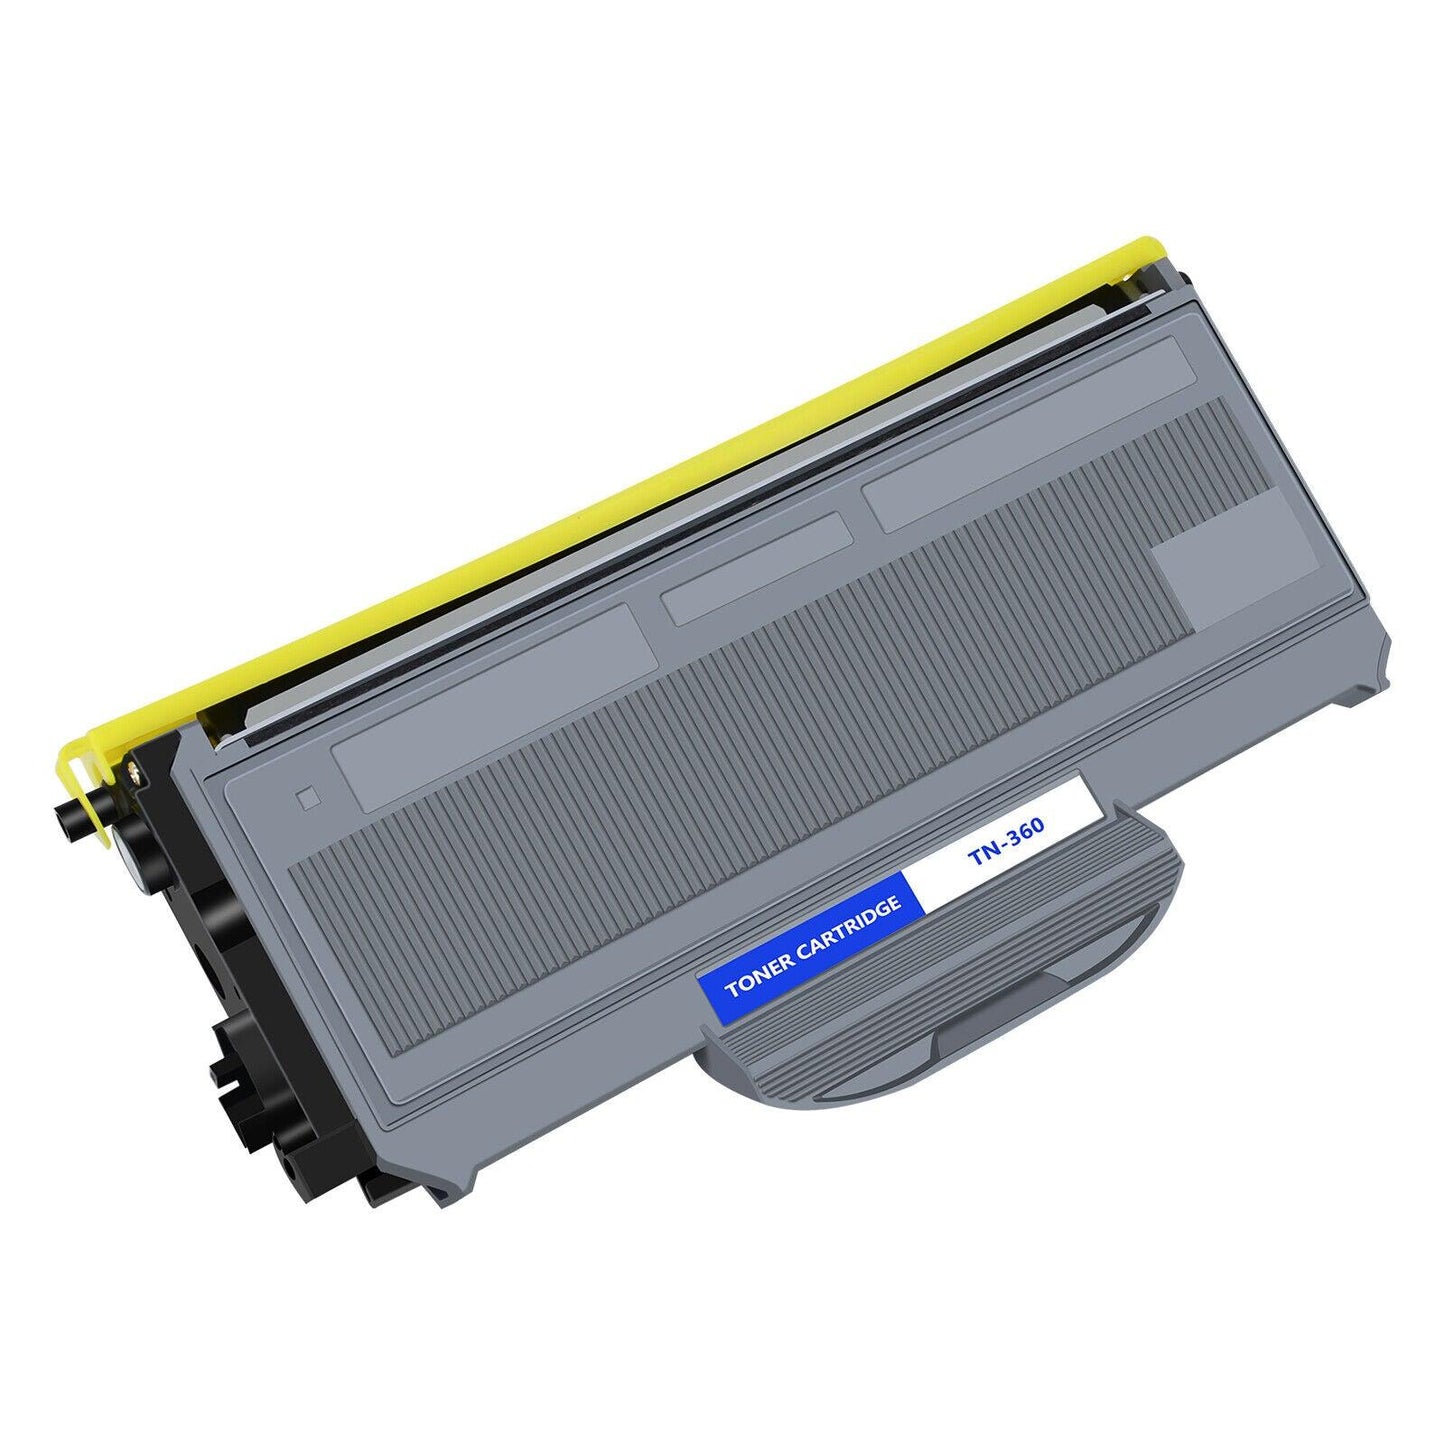 TN360 Toner DR360 Drum For Brother HL-2140 2170W MFC-7340 7840W DCP-7040 - Prinko